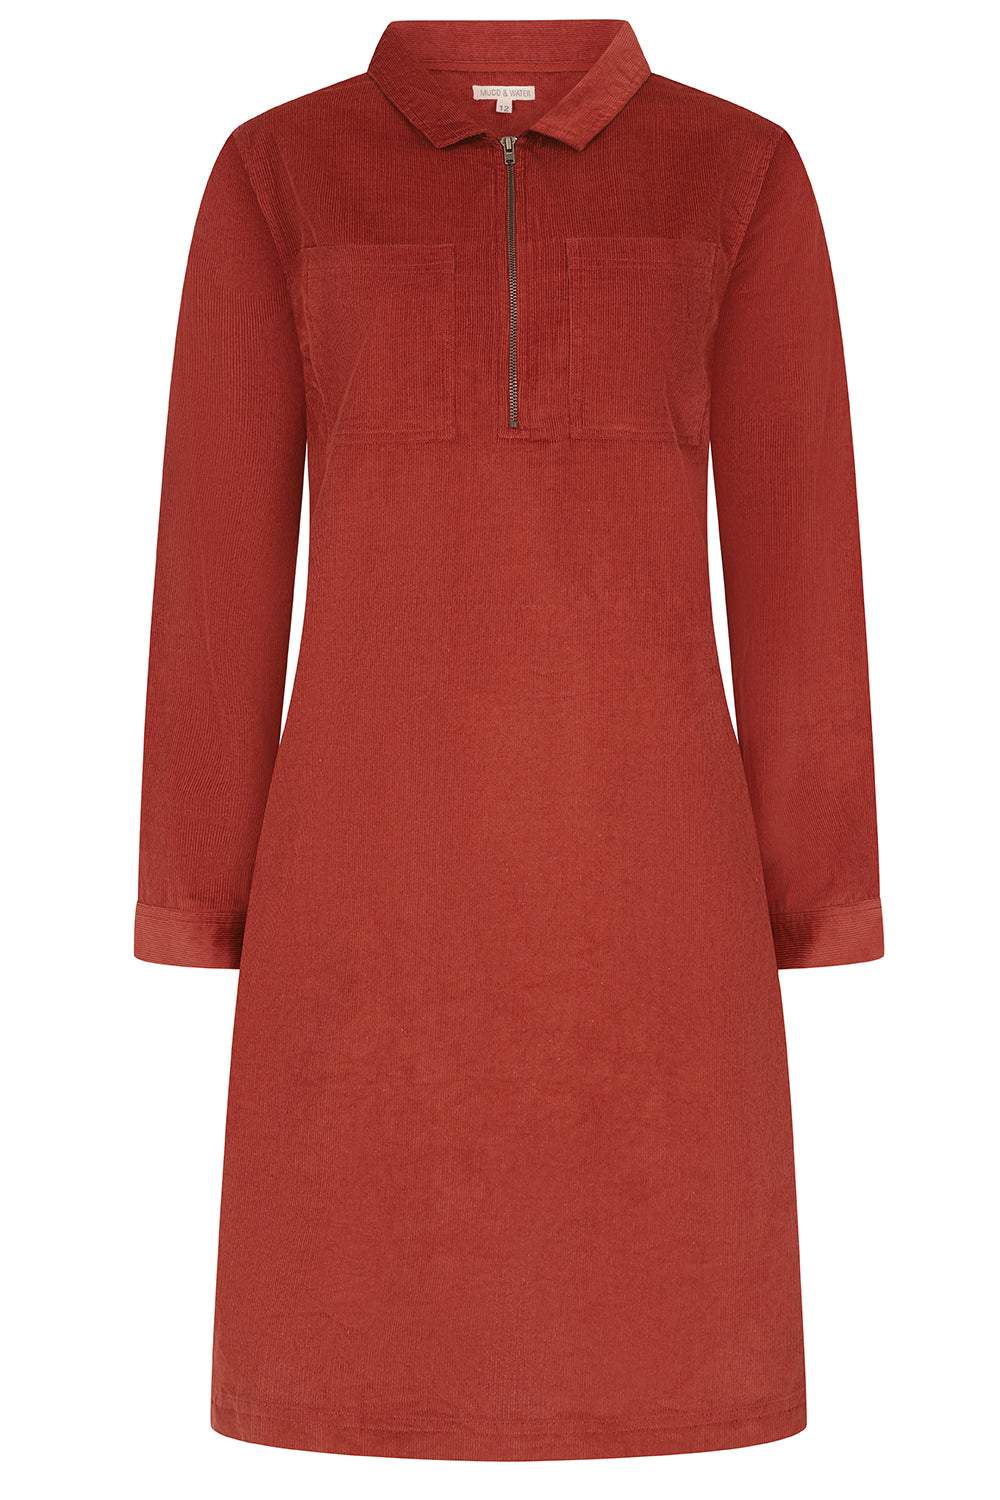 Wirral Dress - Spiced Apple - Organic Cotton Cord